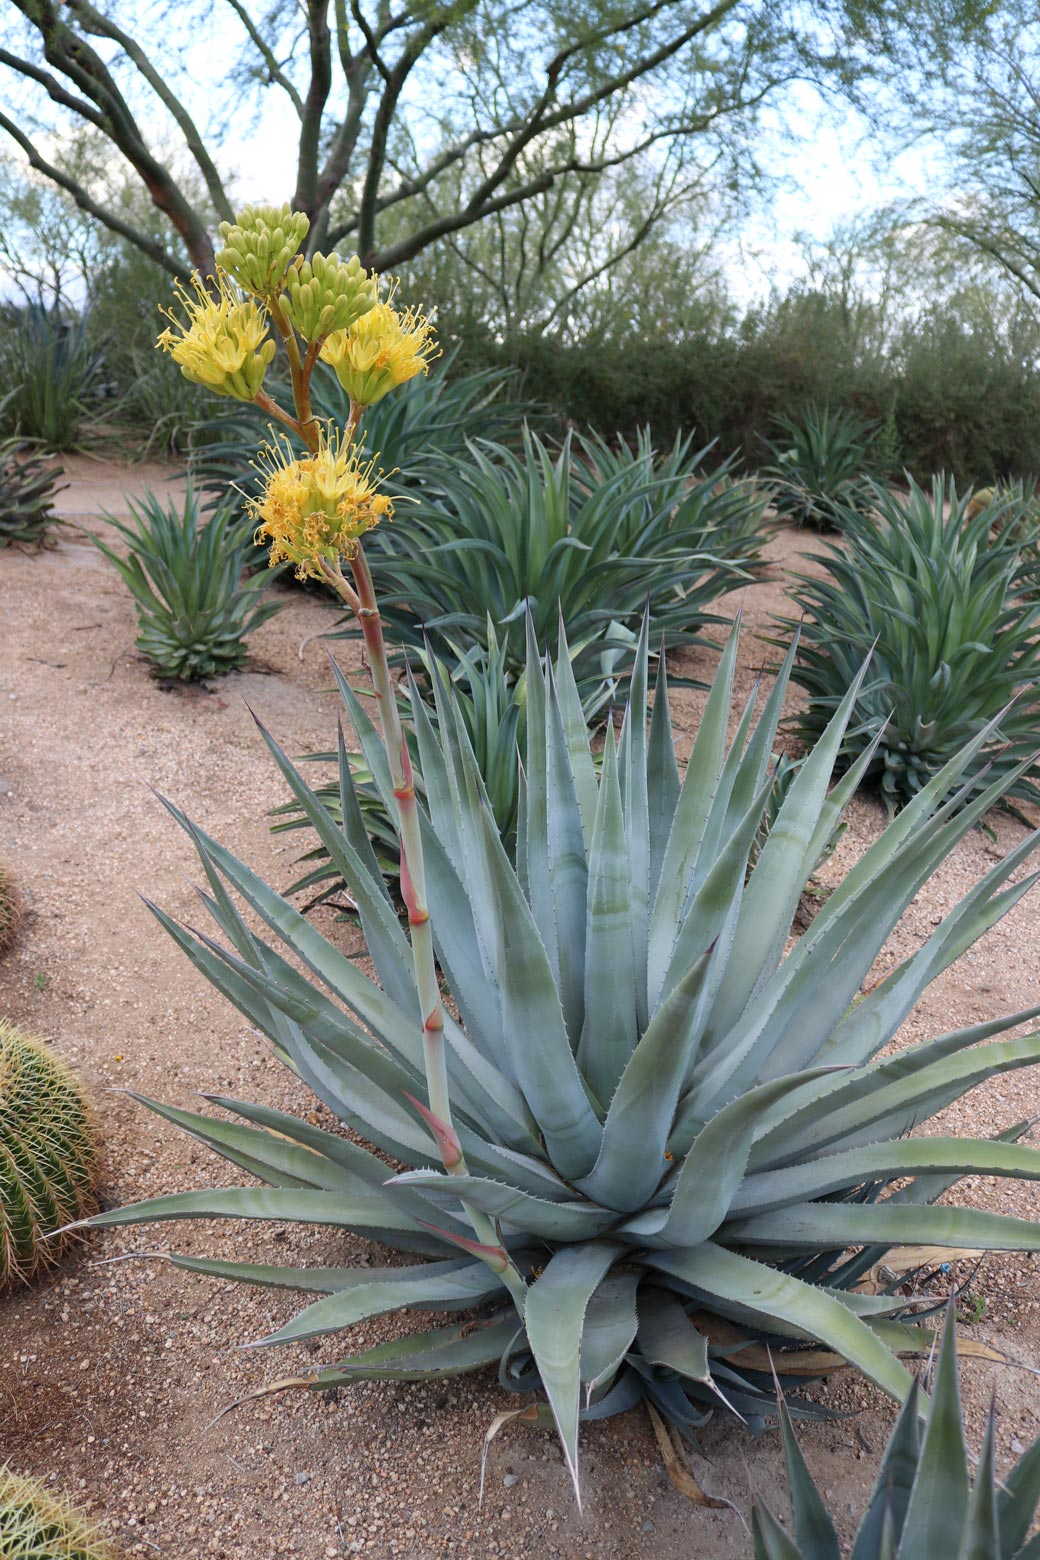 A Desert Agave plant blooms.